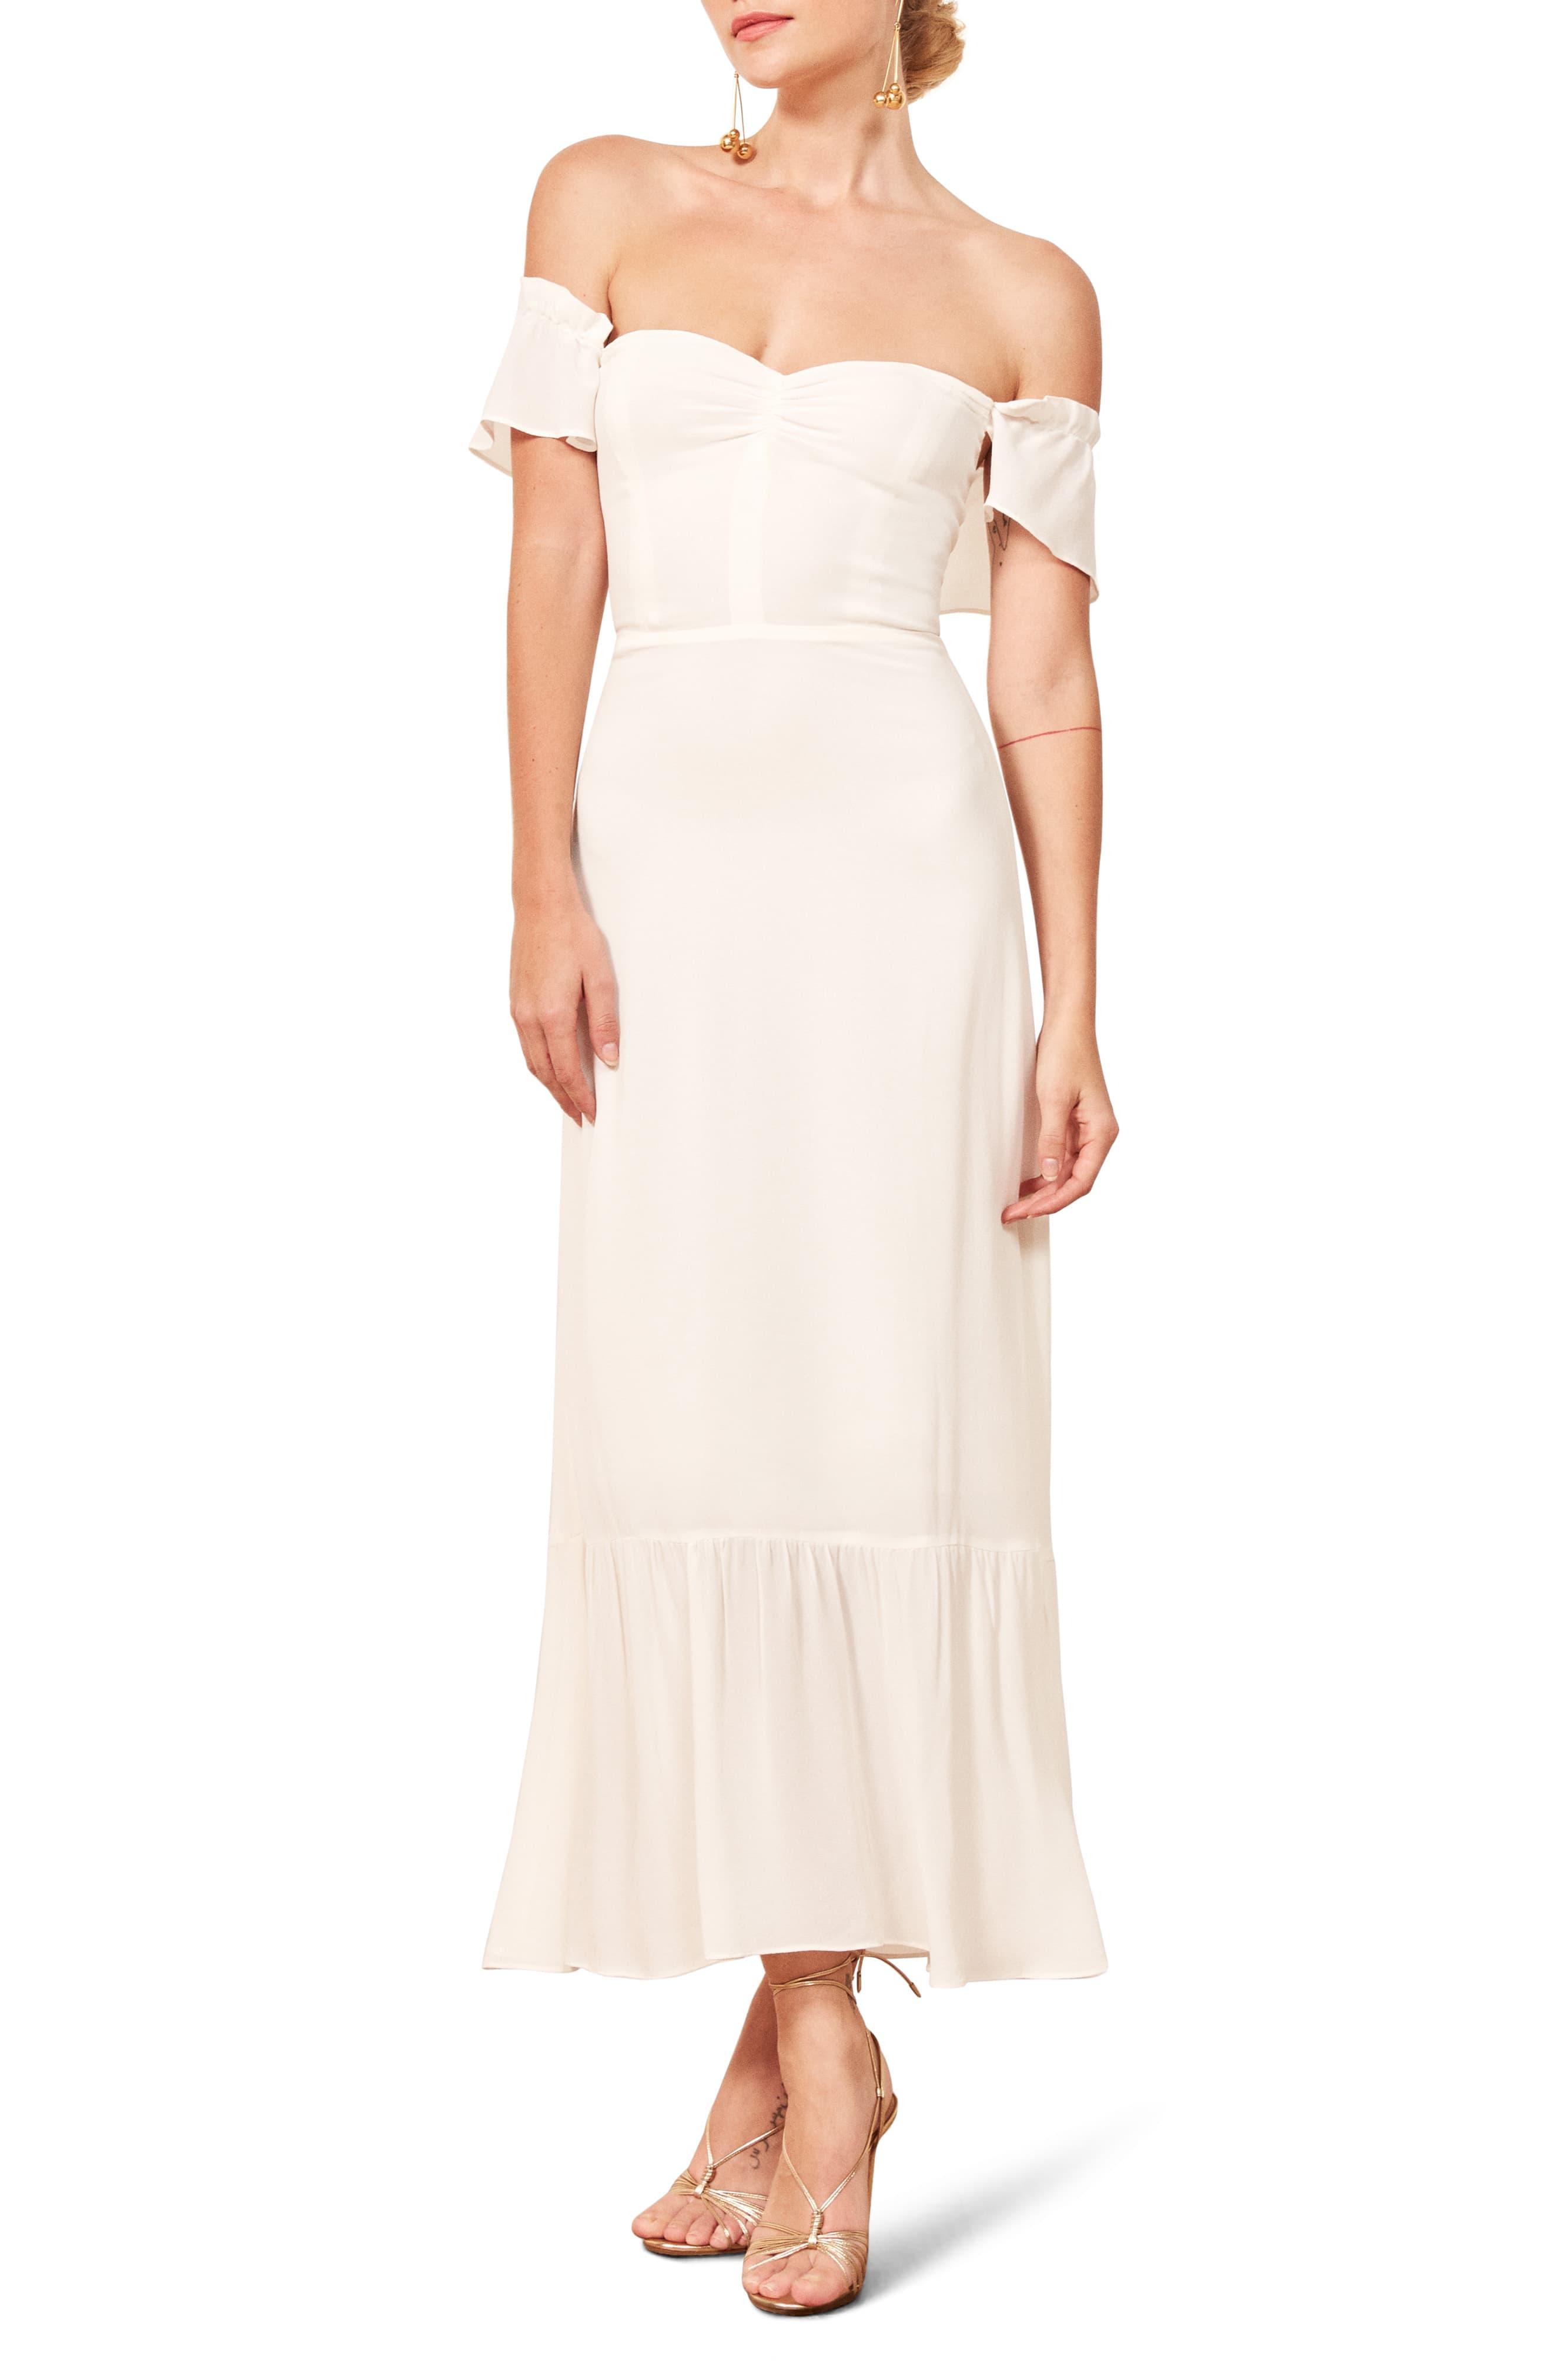 Reformation Butterfly Midi Dress in Ivory (White) - Lyst